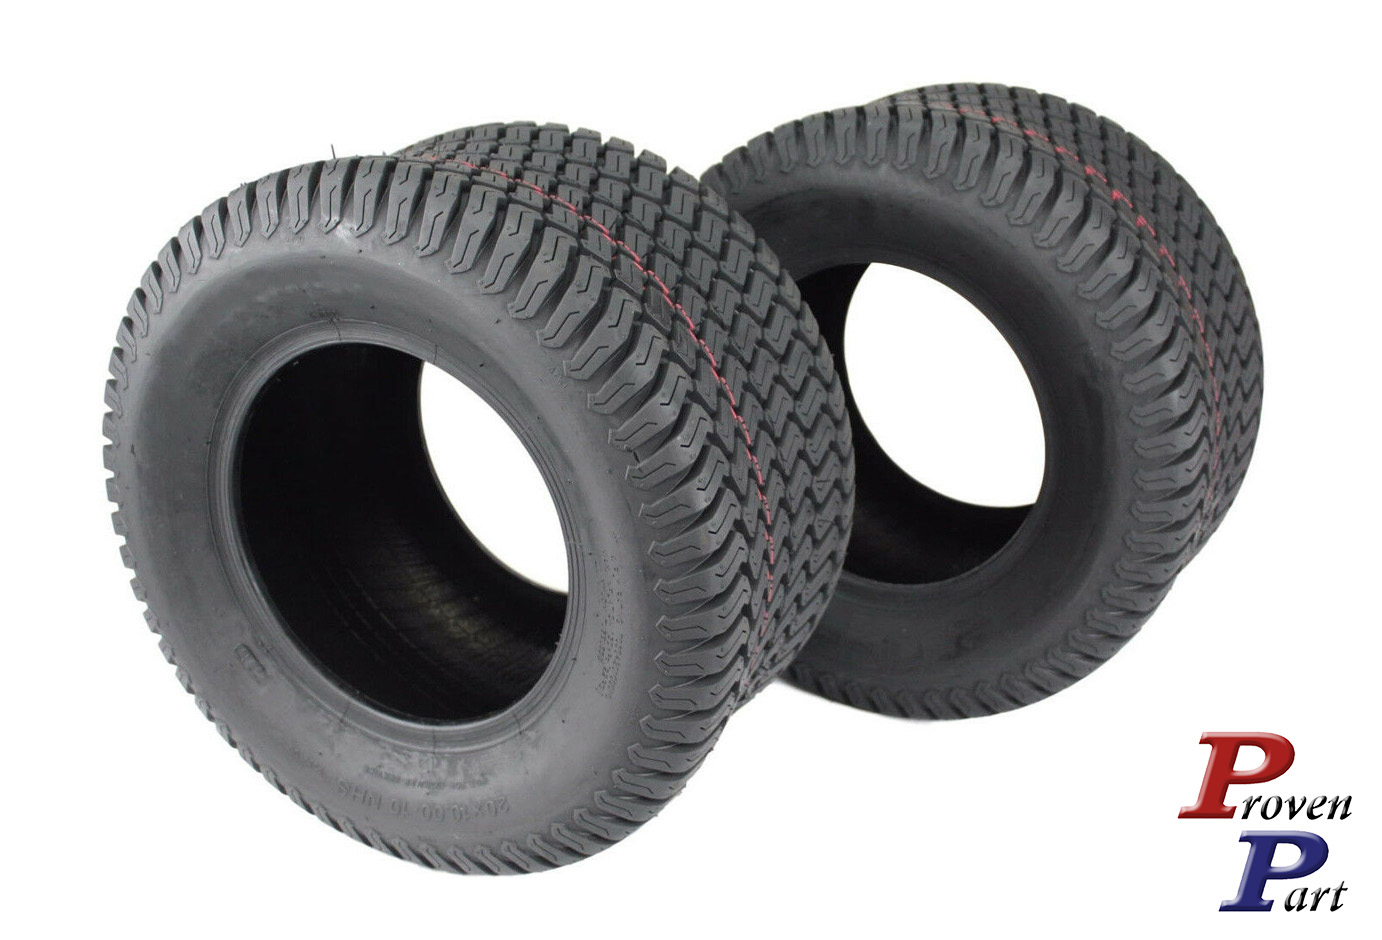 Set of 2 tubeless 4 ply tires 20x10.00-10 replace Carlisle 51141